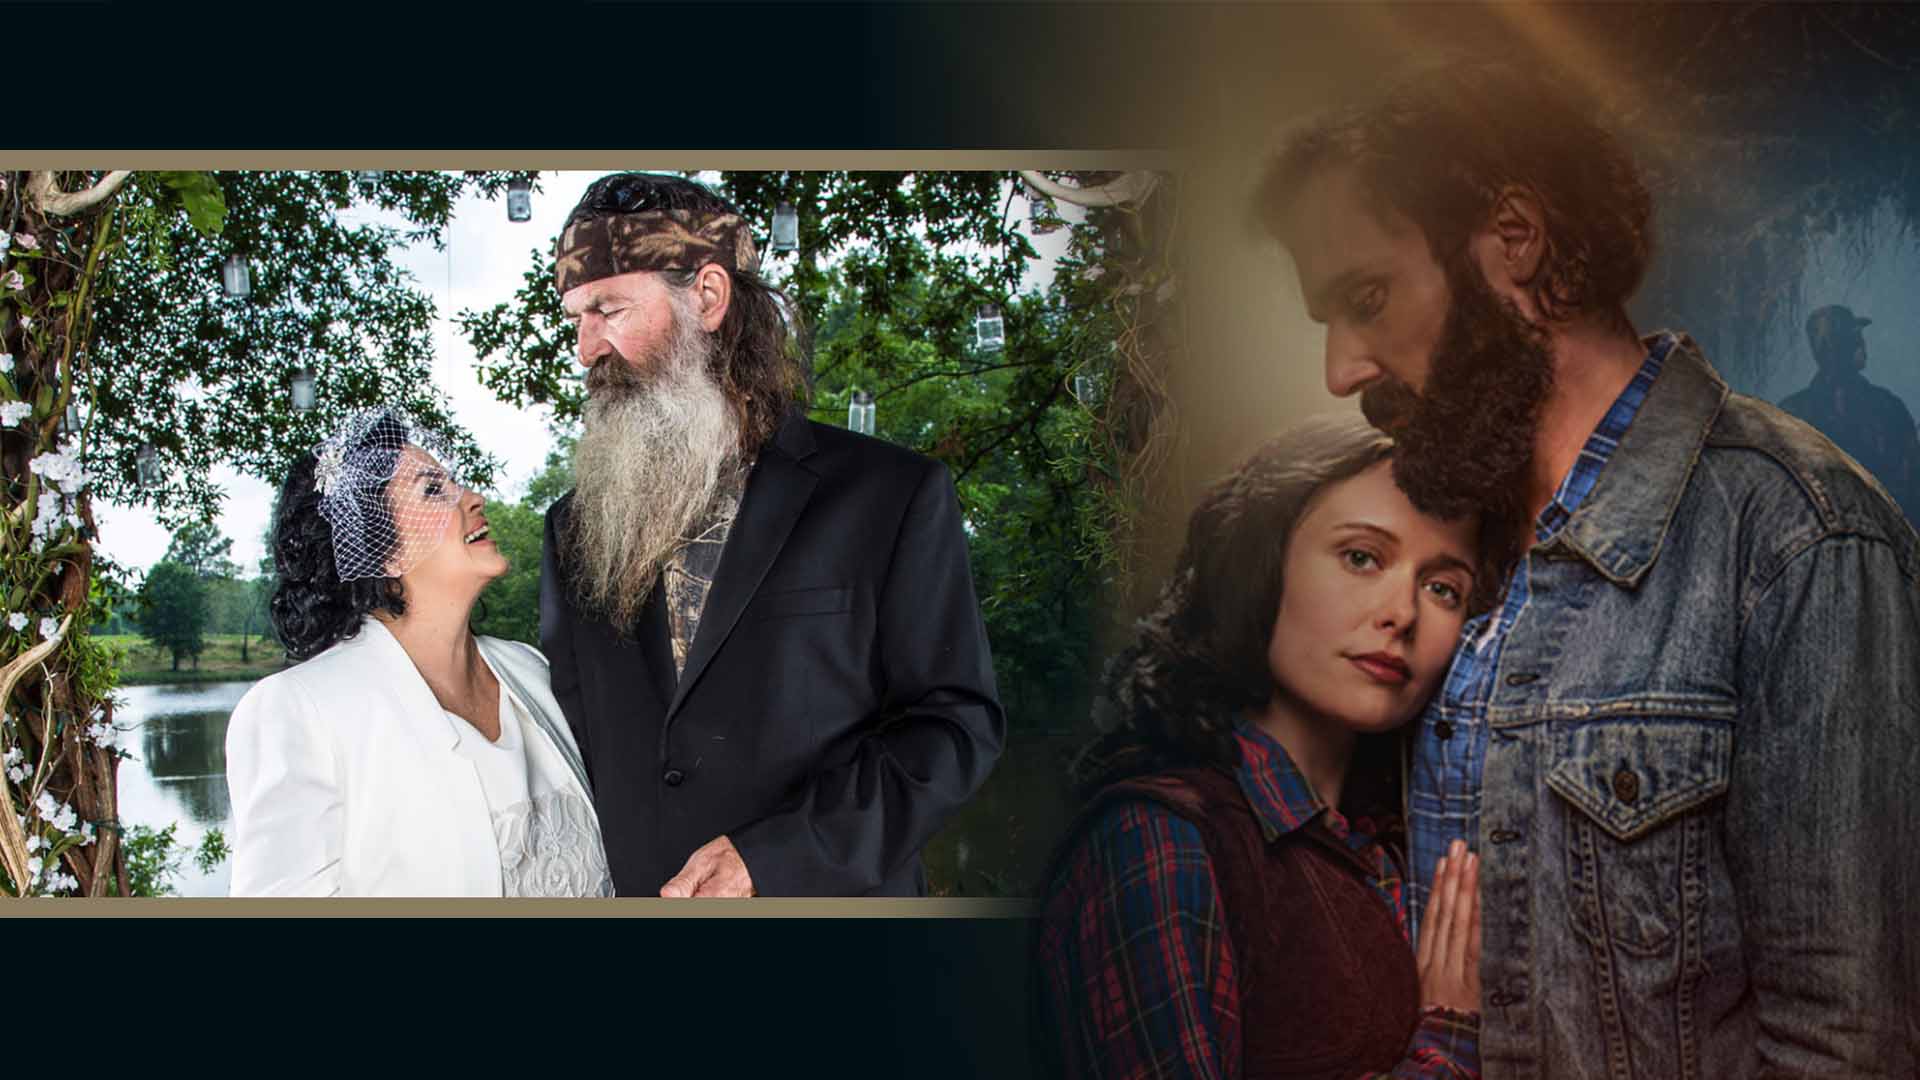 The Blind the true story of Phil and Kay Robertson from Duck Dynasty